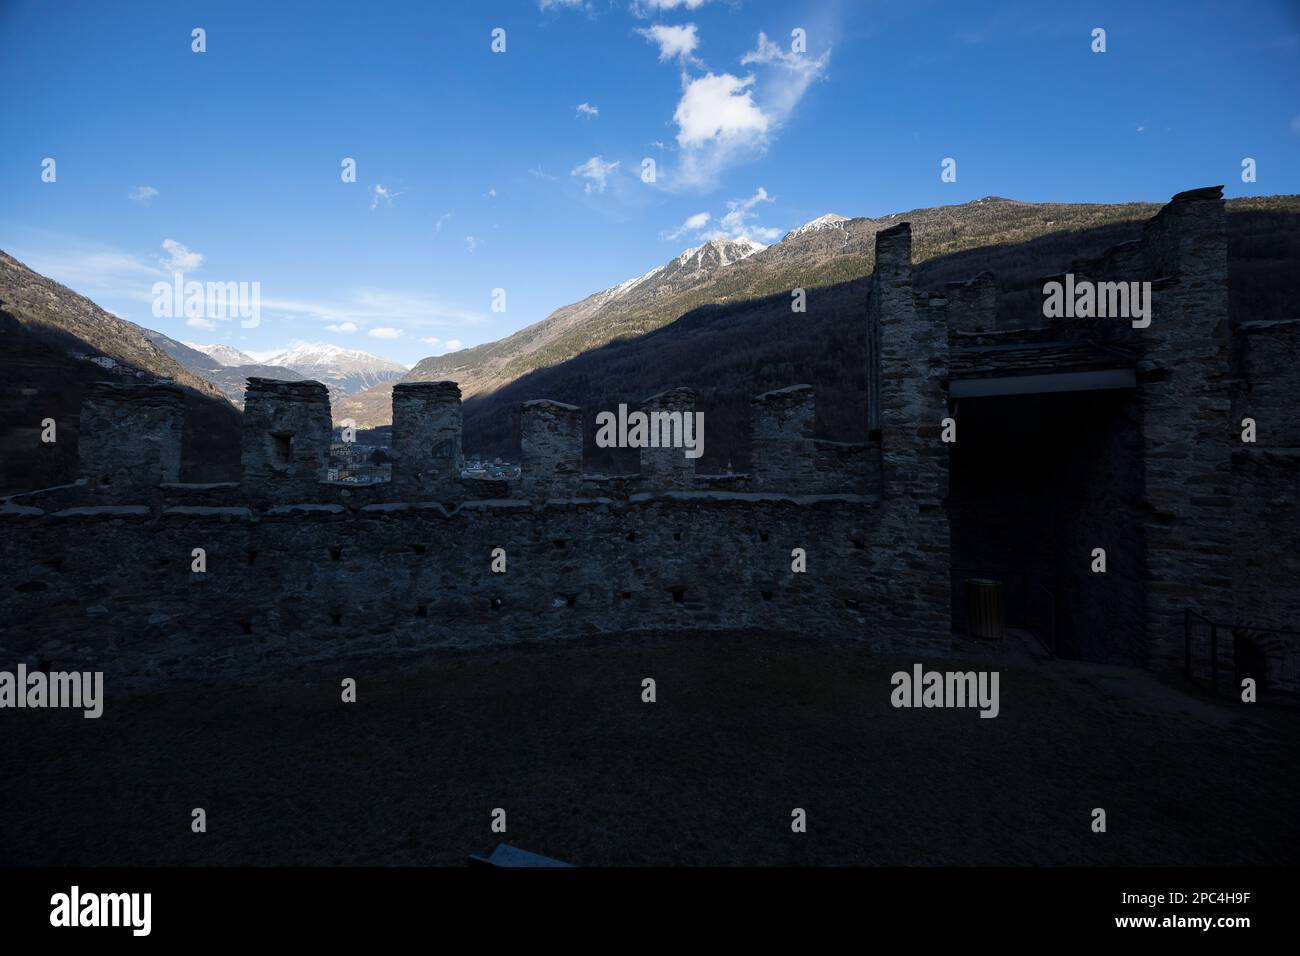 Valtellina, Italy - March 12, 2023: street view of the ancient walls surrounding Old Castle in Grosio, a fort in ruins. No people are visible. Stock Photo